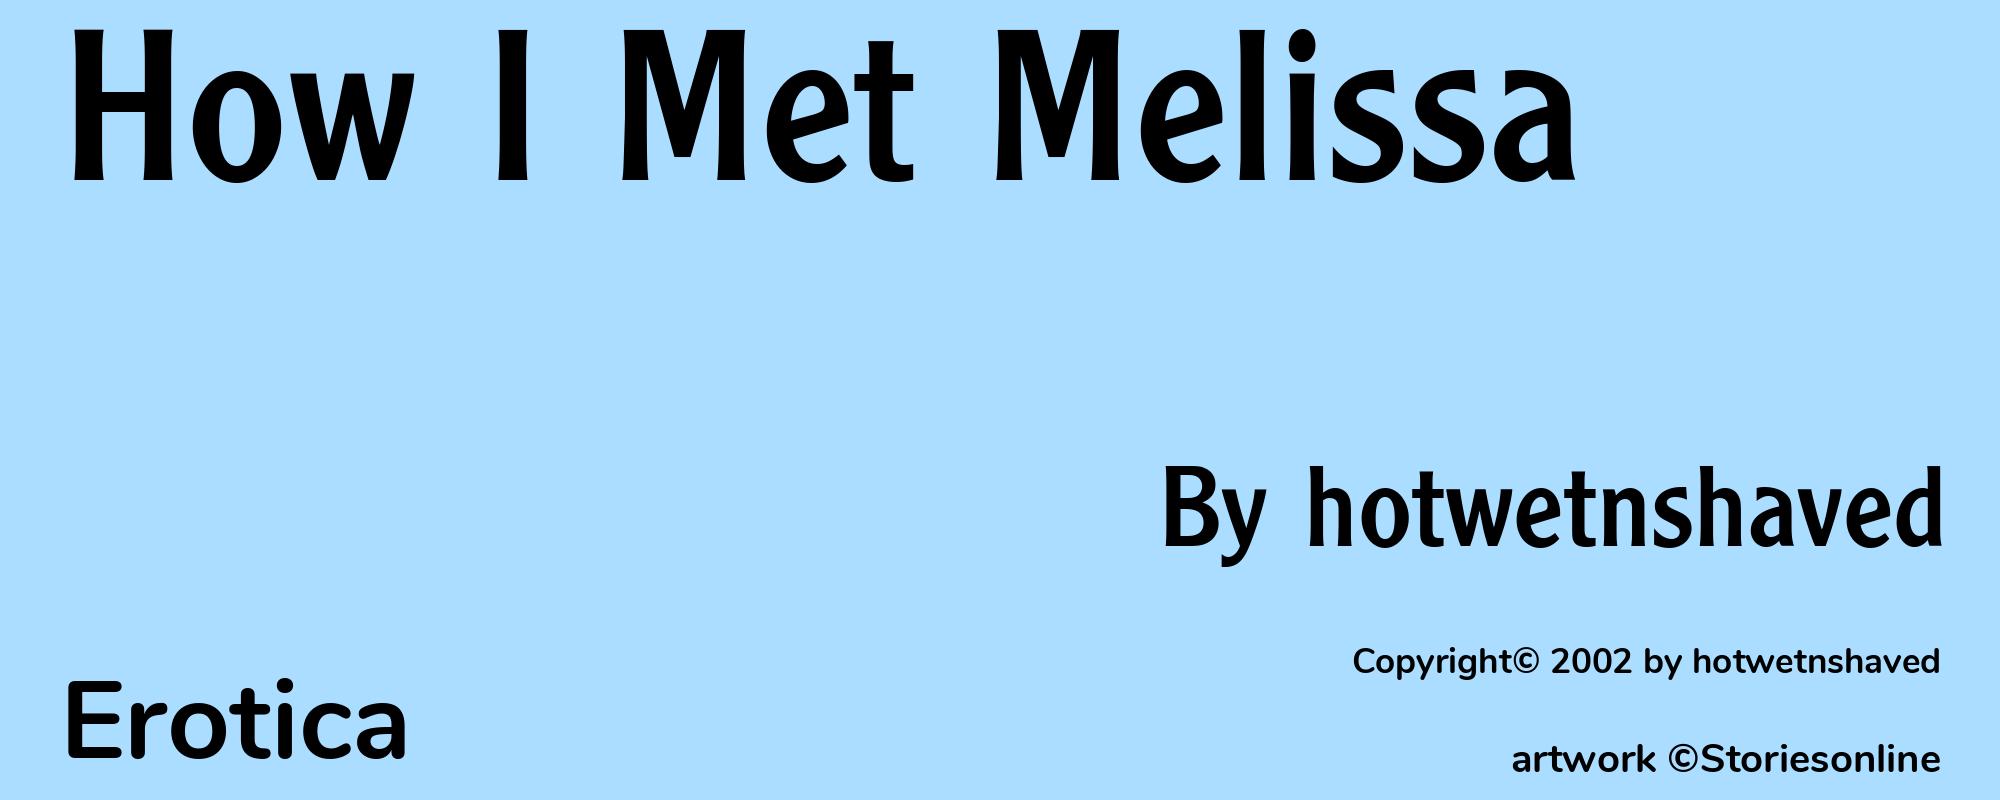 How I Met Melissa - Cover